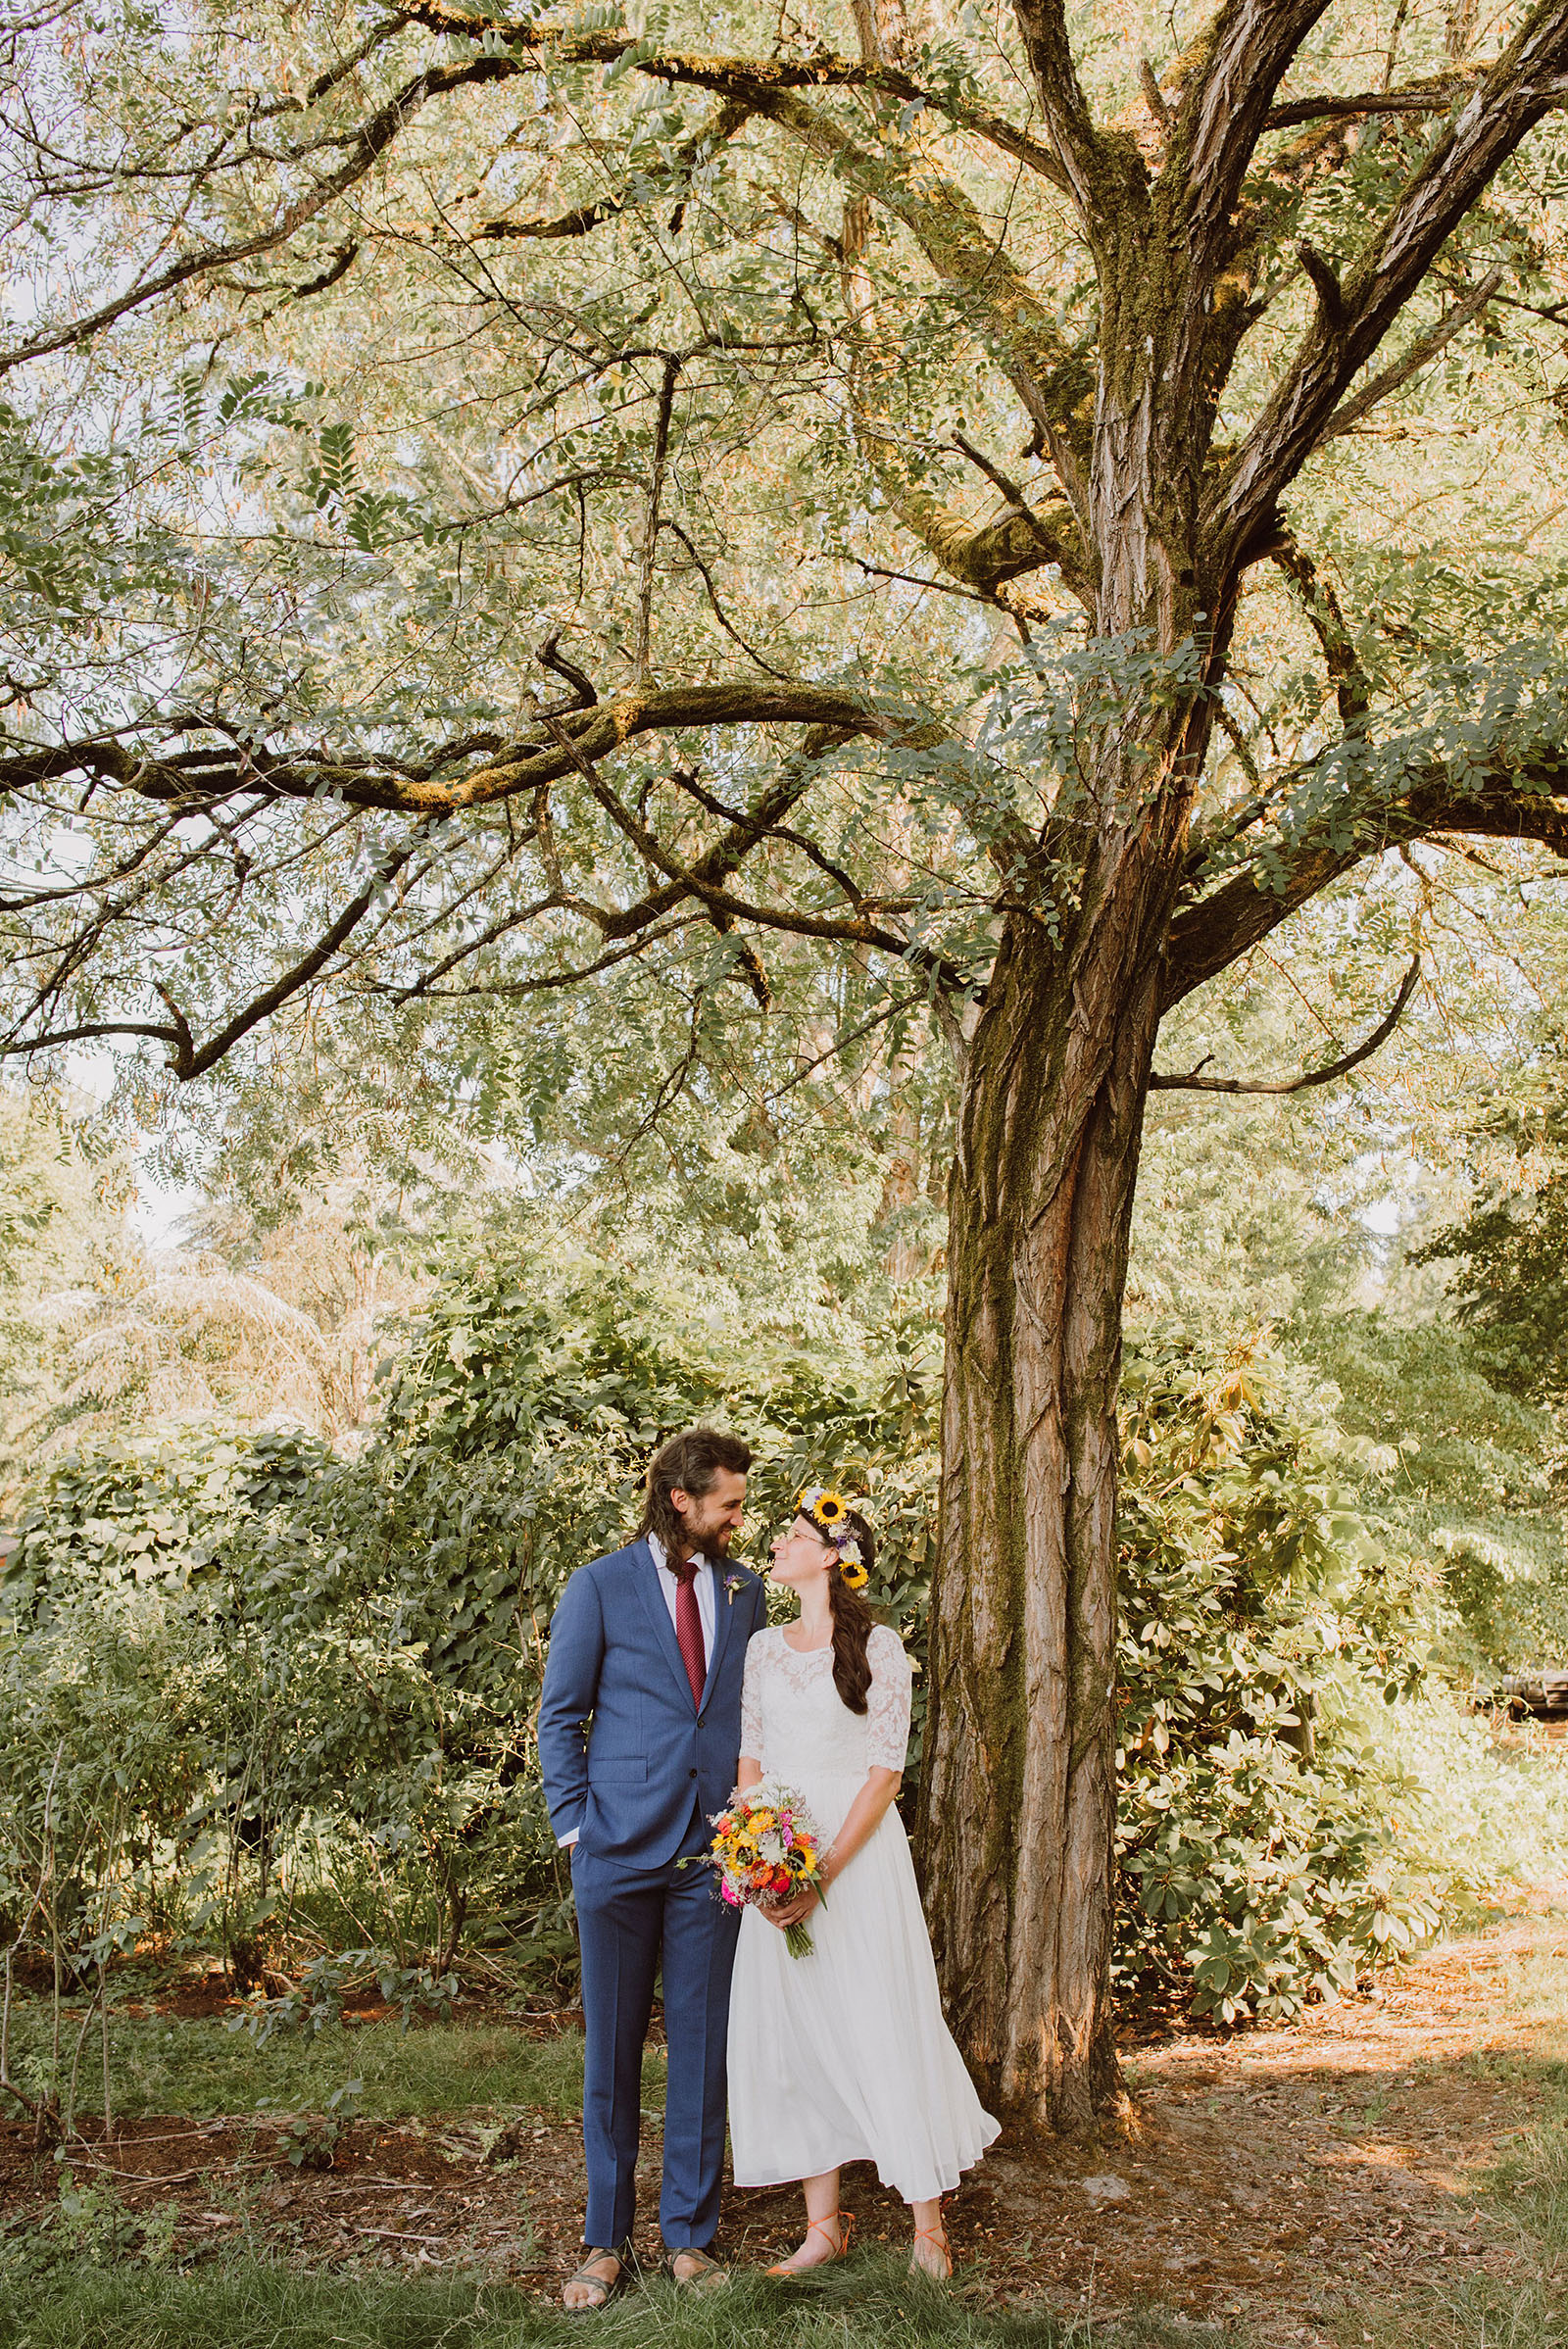 Portrait of the bride and groom under a tree | Sauvie Island Wedding